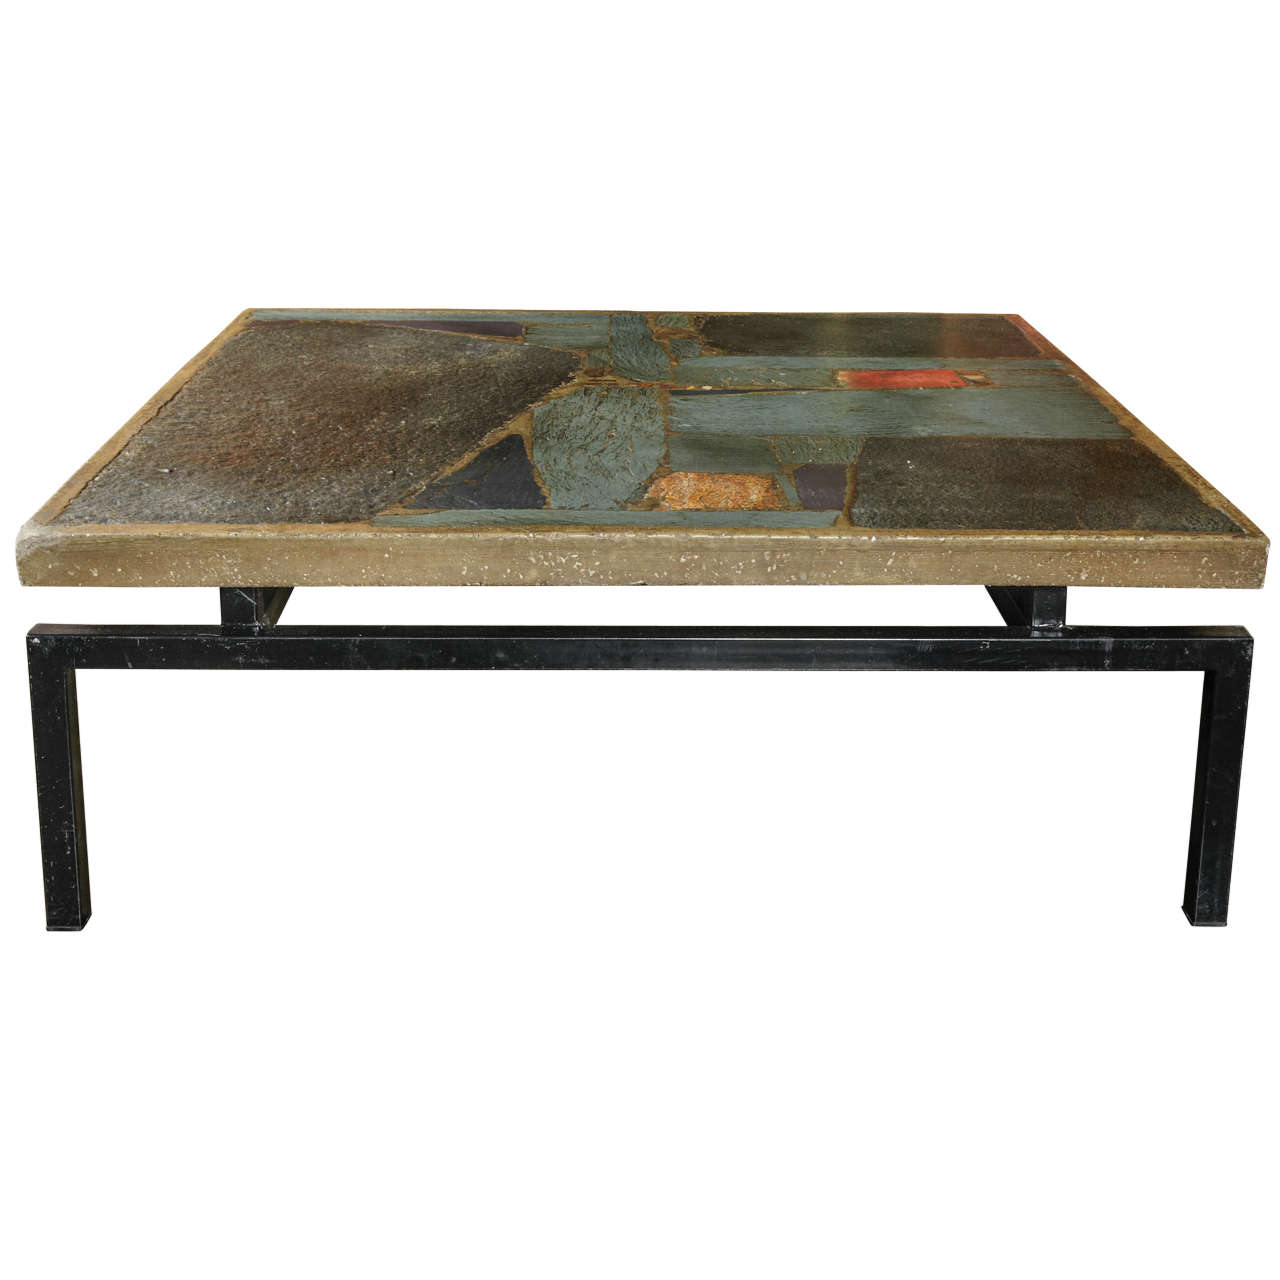 Paul Kingma Coffee Table With Incrustation Of Slate & Stone Pieces For Sale